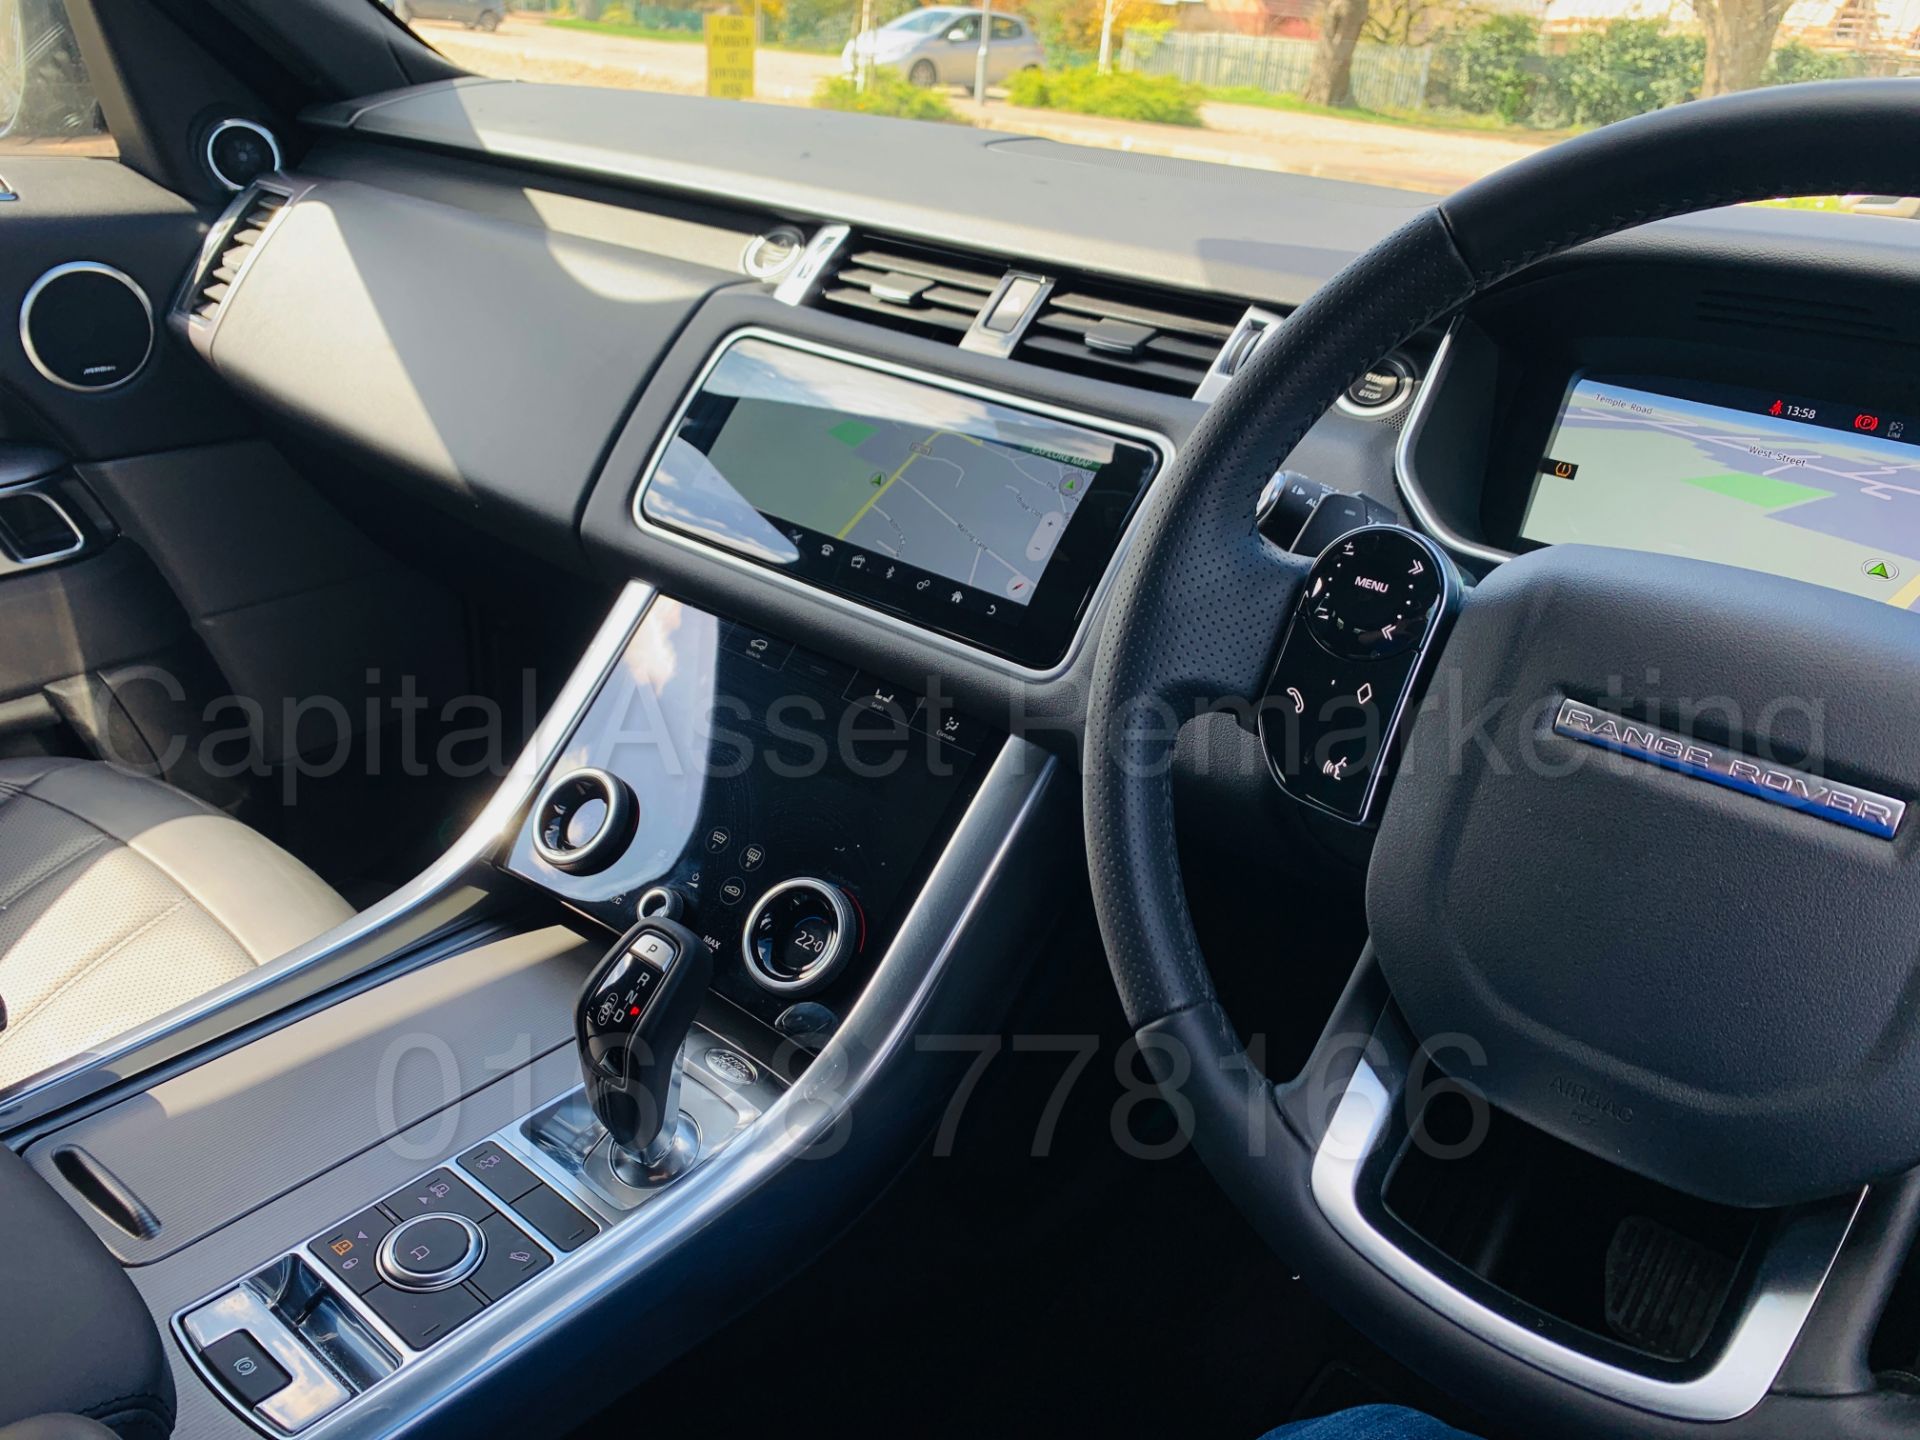 (ON SALE) RANGE ROVER SPORT *HSE* (2019 - ALL NEW MODEL) '3.0 SDV6 - 306 BHP - 8 SPEED AUTO' - Image 58 of 73